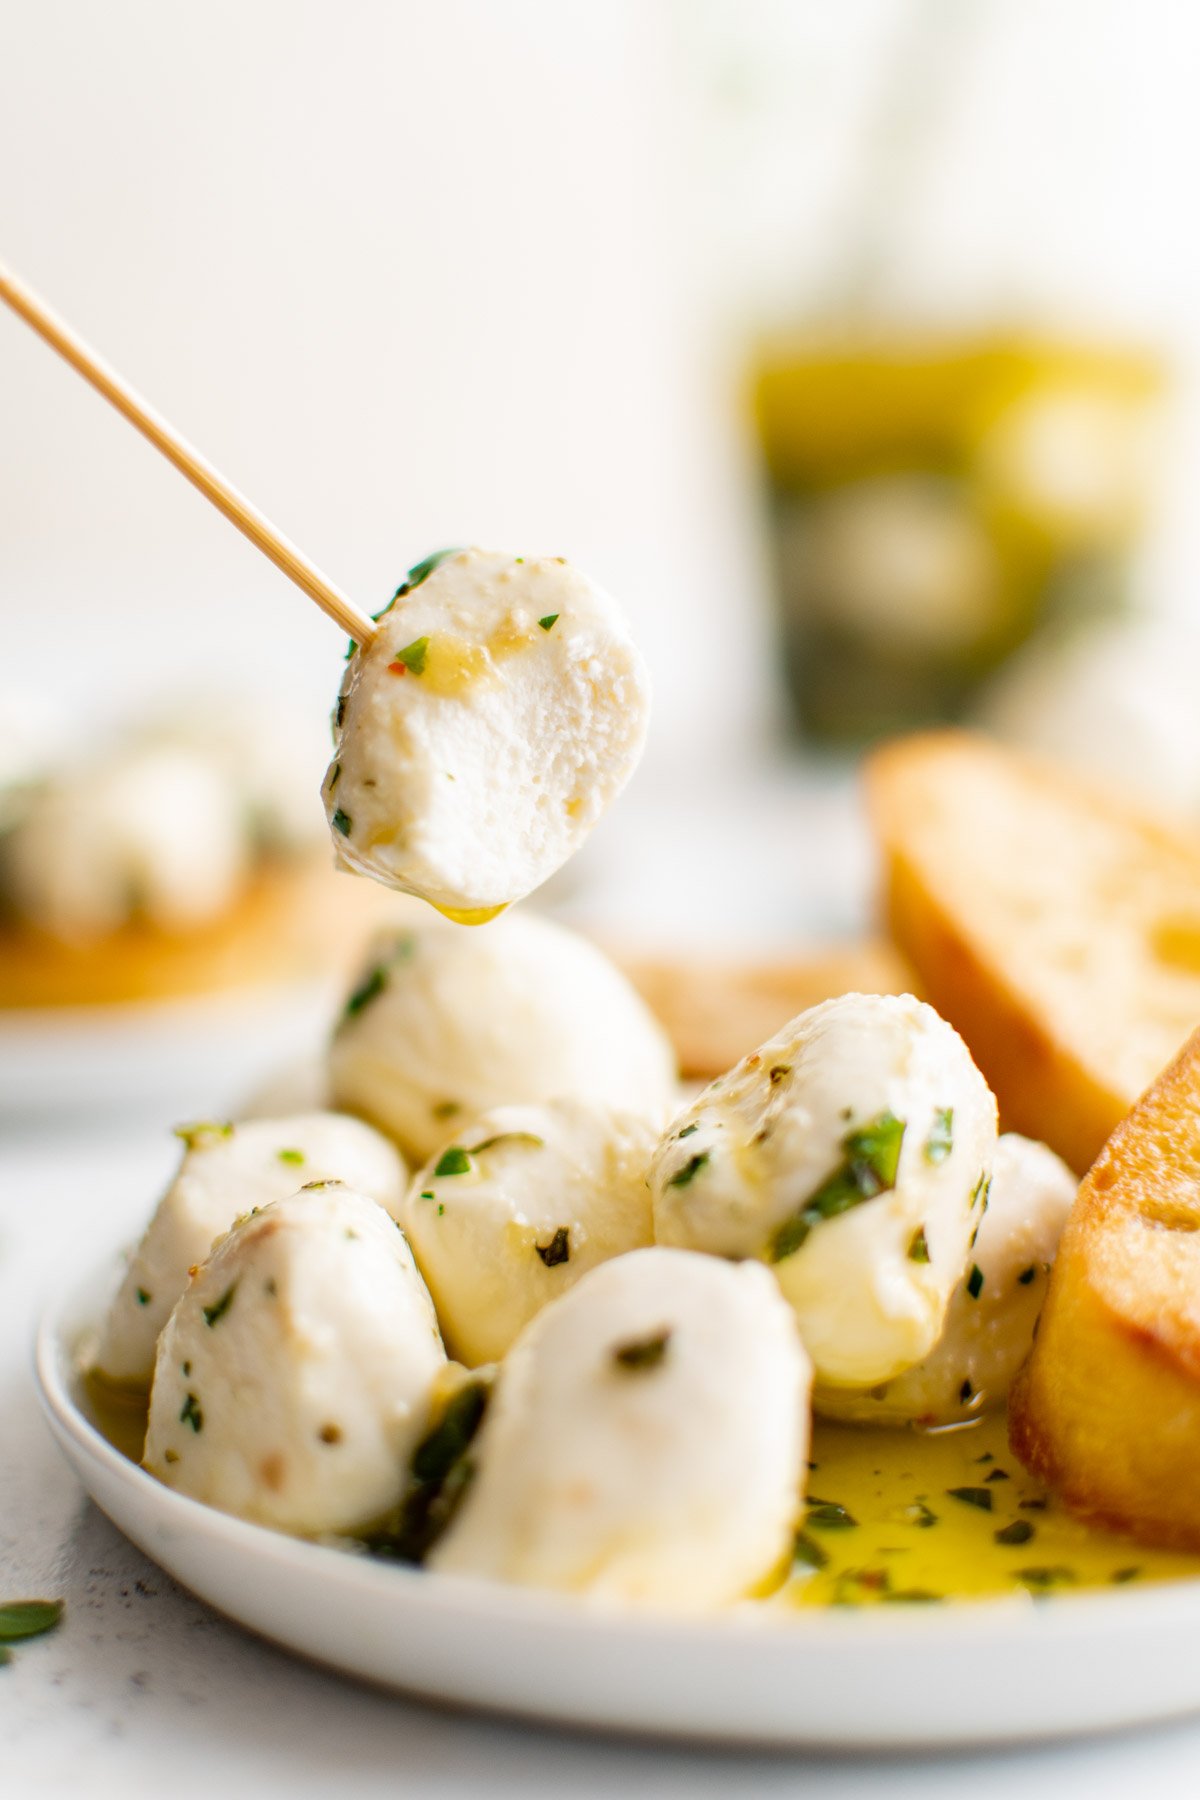 Mozzarella balls with herbs and olive oil with a toothpick on a plate.